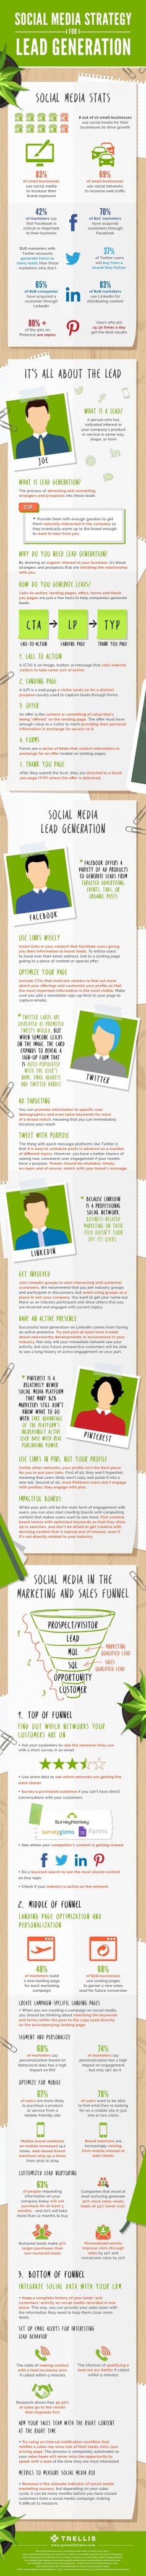 Social Media Marketing Strategy for Lead Generation [Infographic]